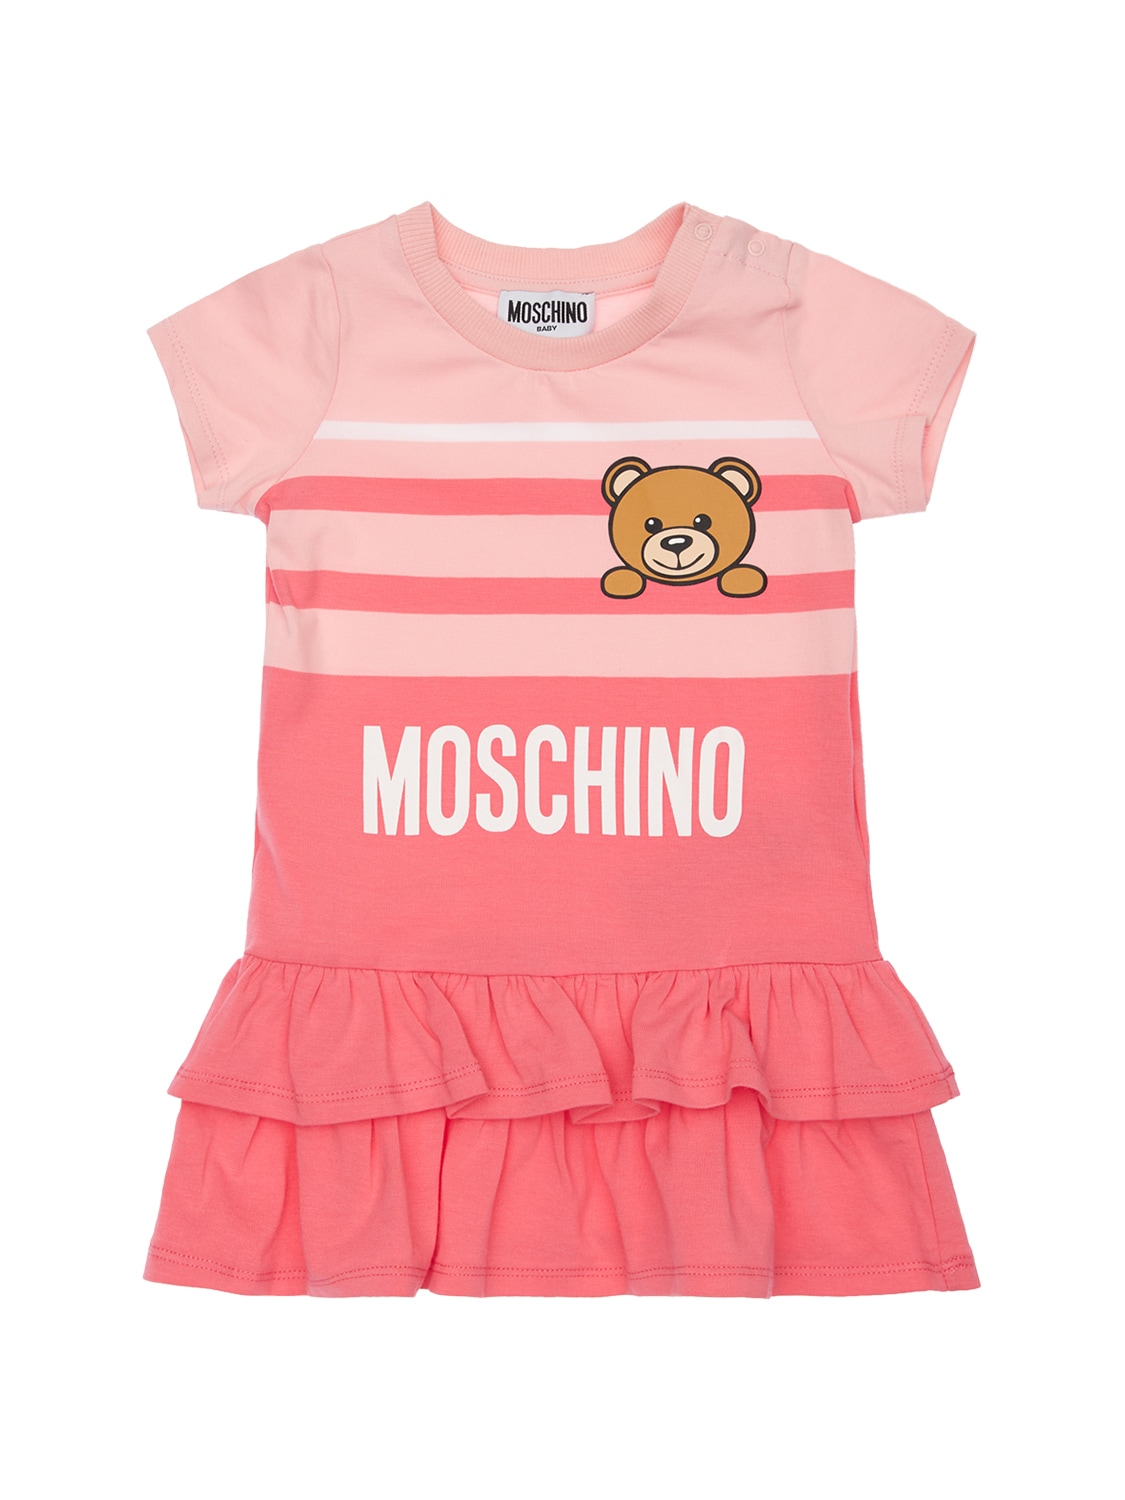 Moschino Kids' Toy Print Cotton Jersey Dress In Pink